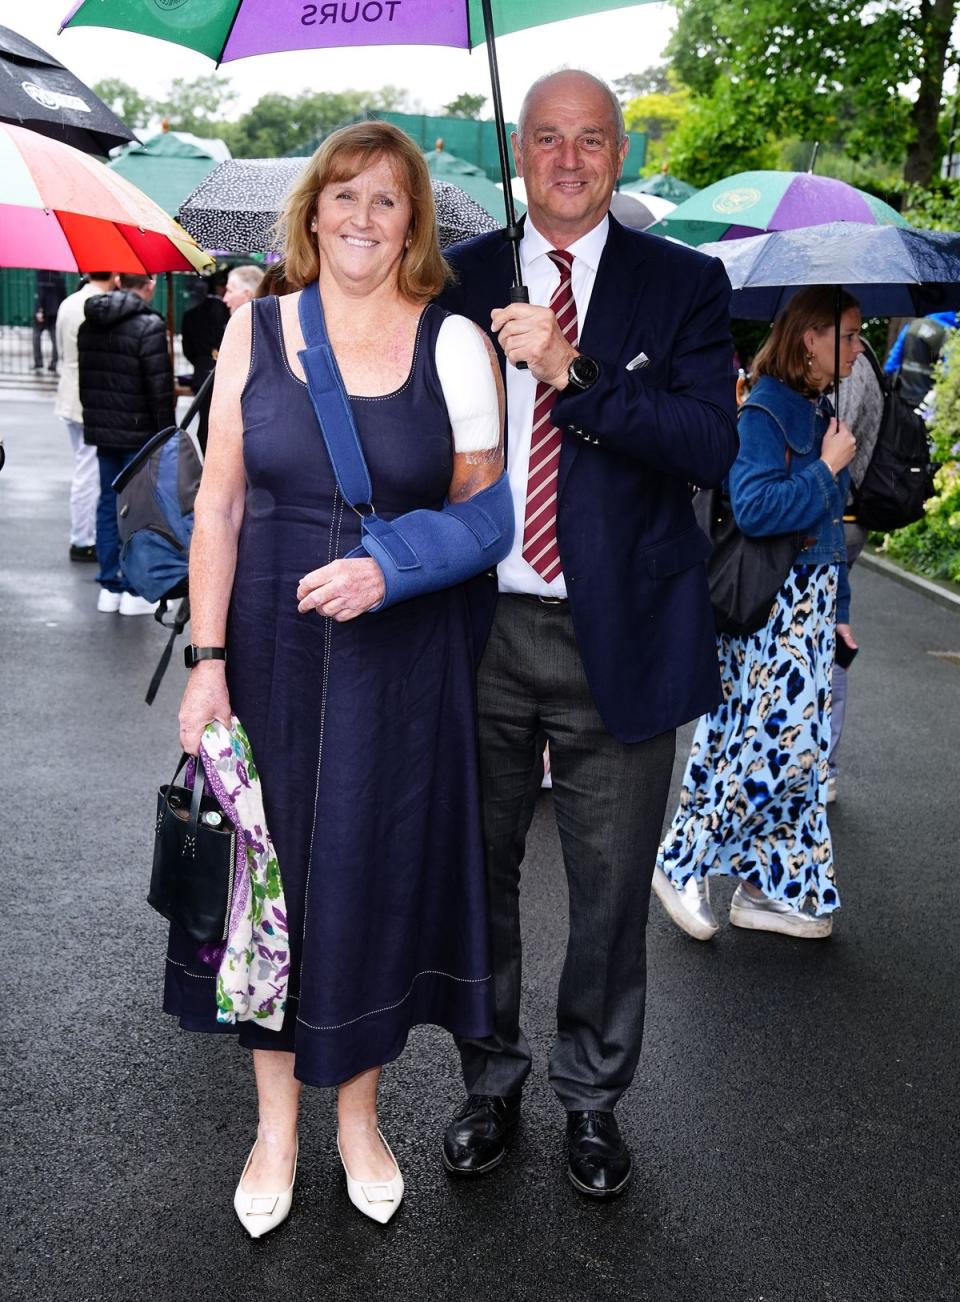 Sir Steve Redgrave and Ann Redgrave arrive at Wimbledon (Aaron Chown/PA Wire)